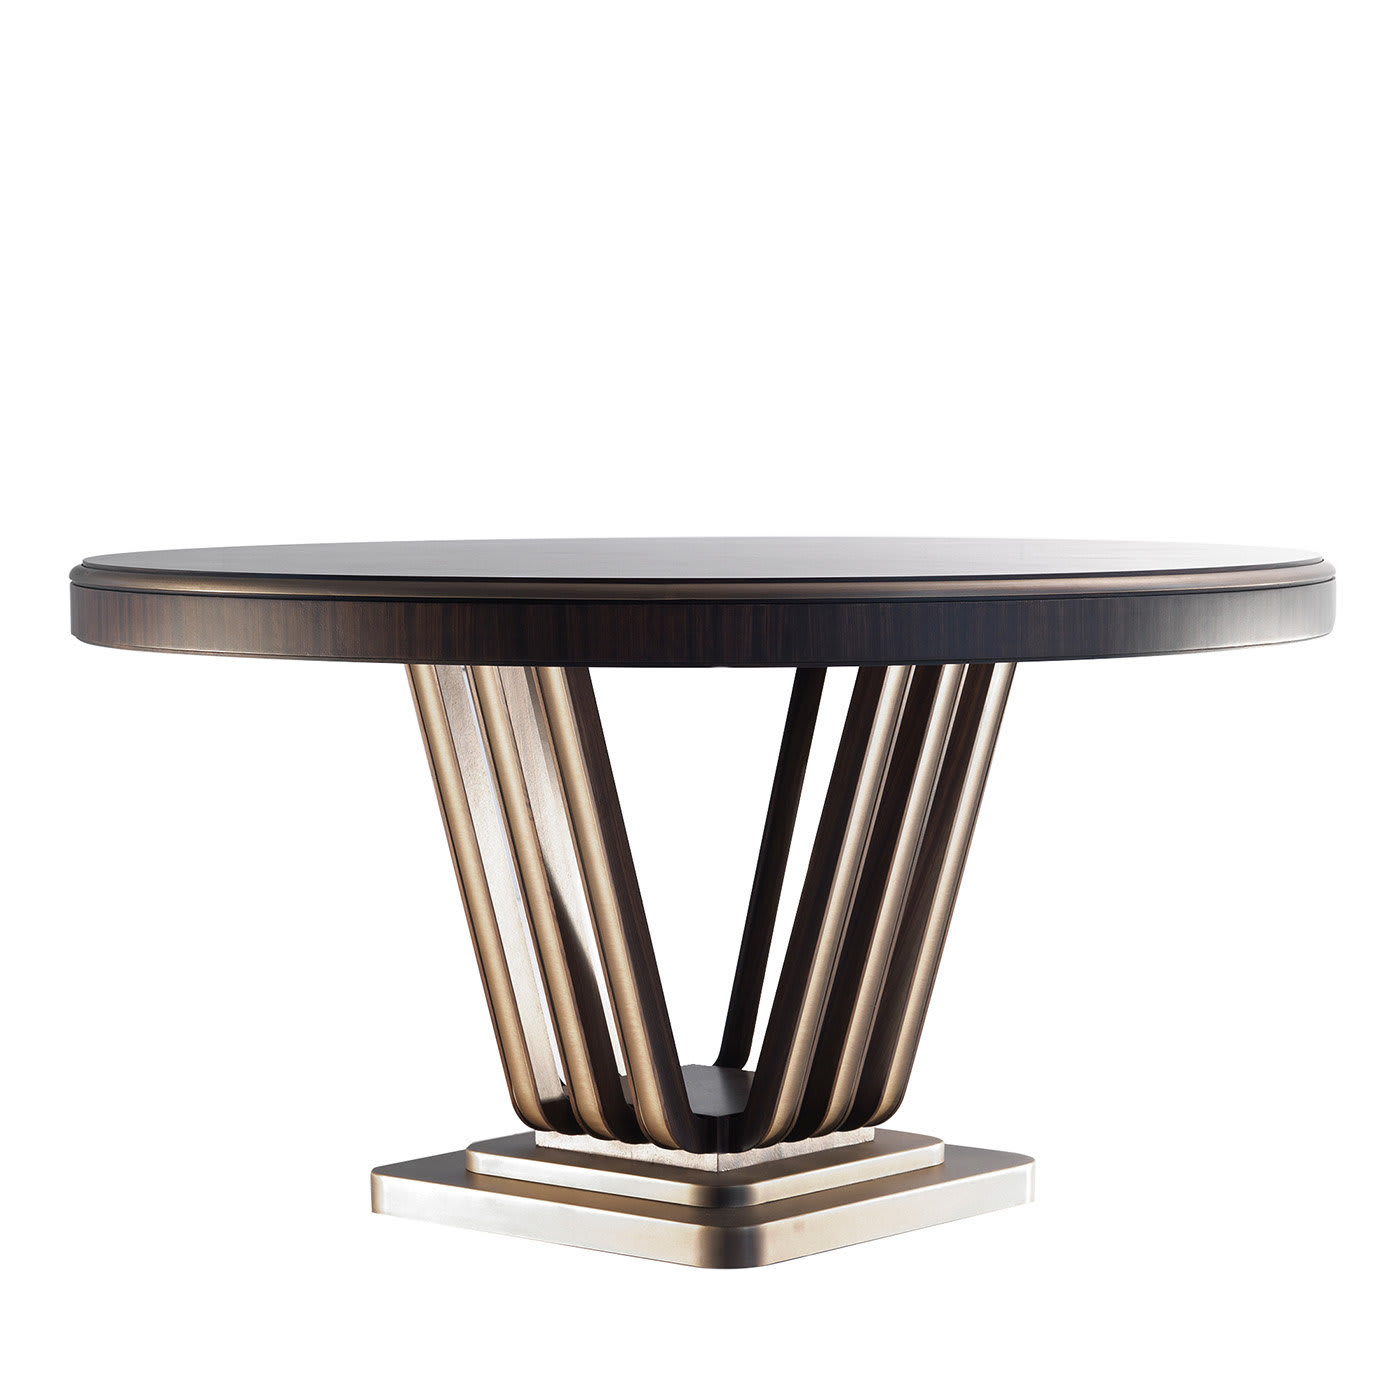 Zebra and Brass Dining Table - Annibale Colombo